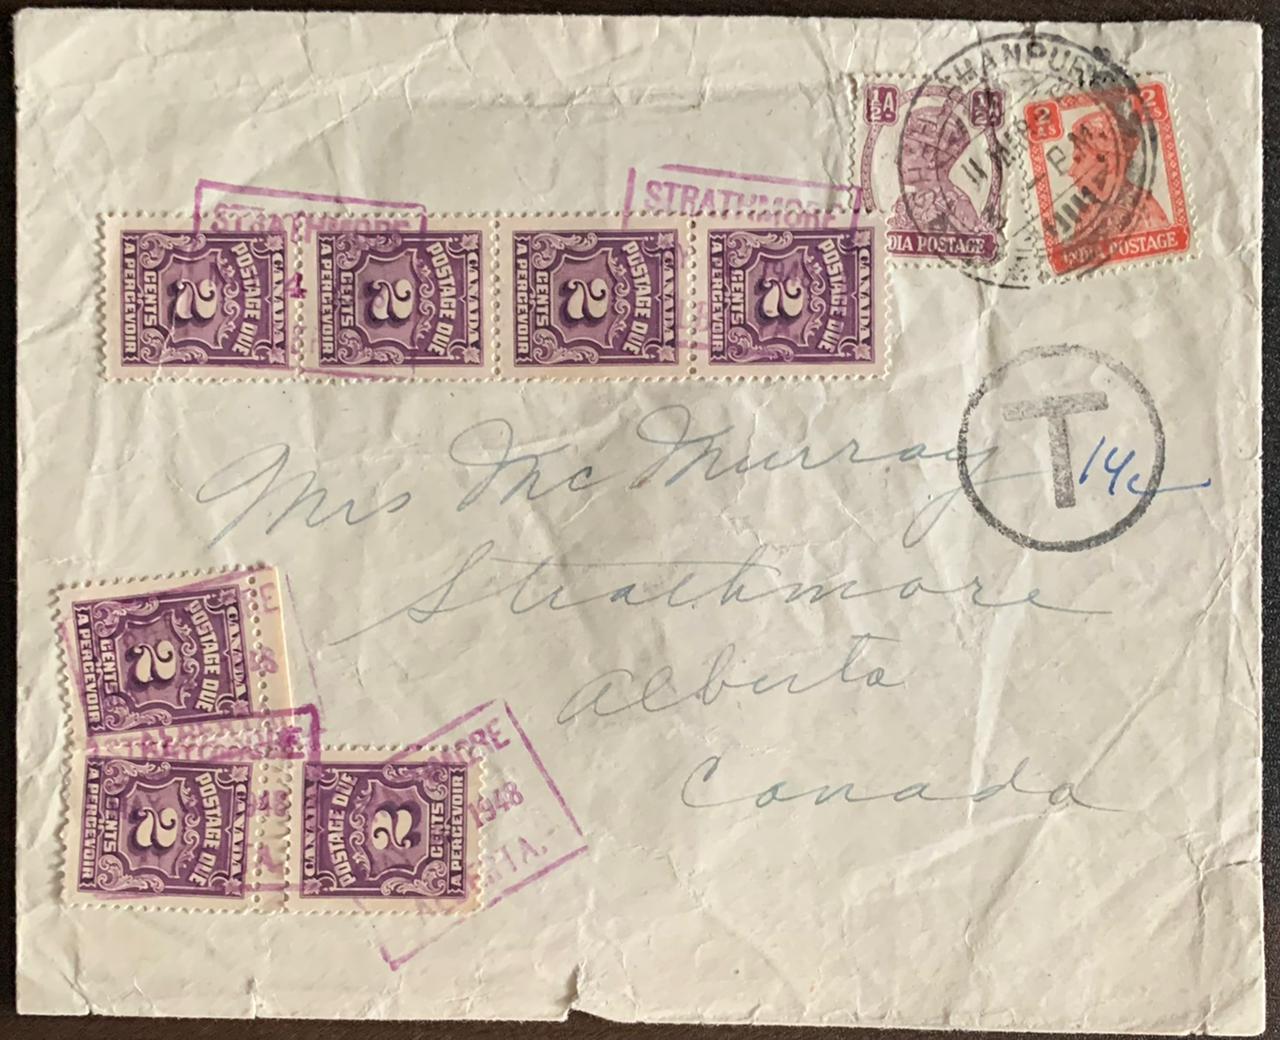 India 1945 KGVI Cover to Canada with Multiple Postage Due stamps